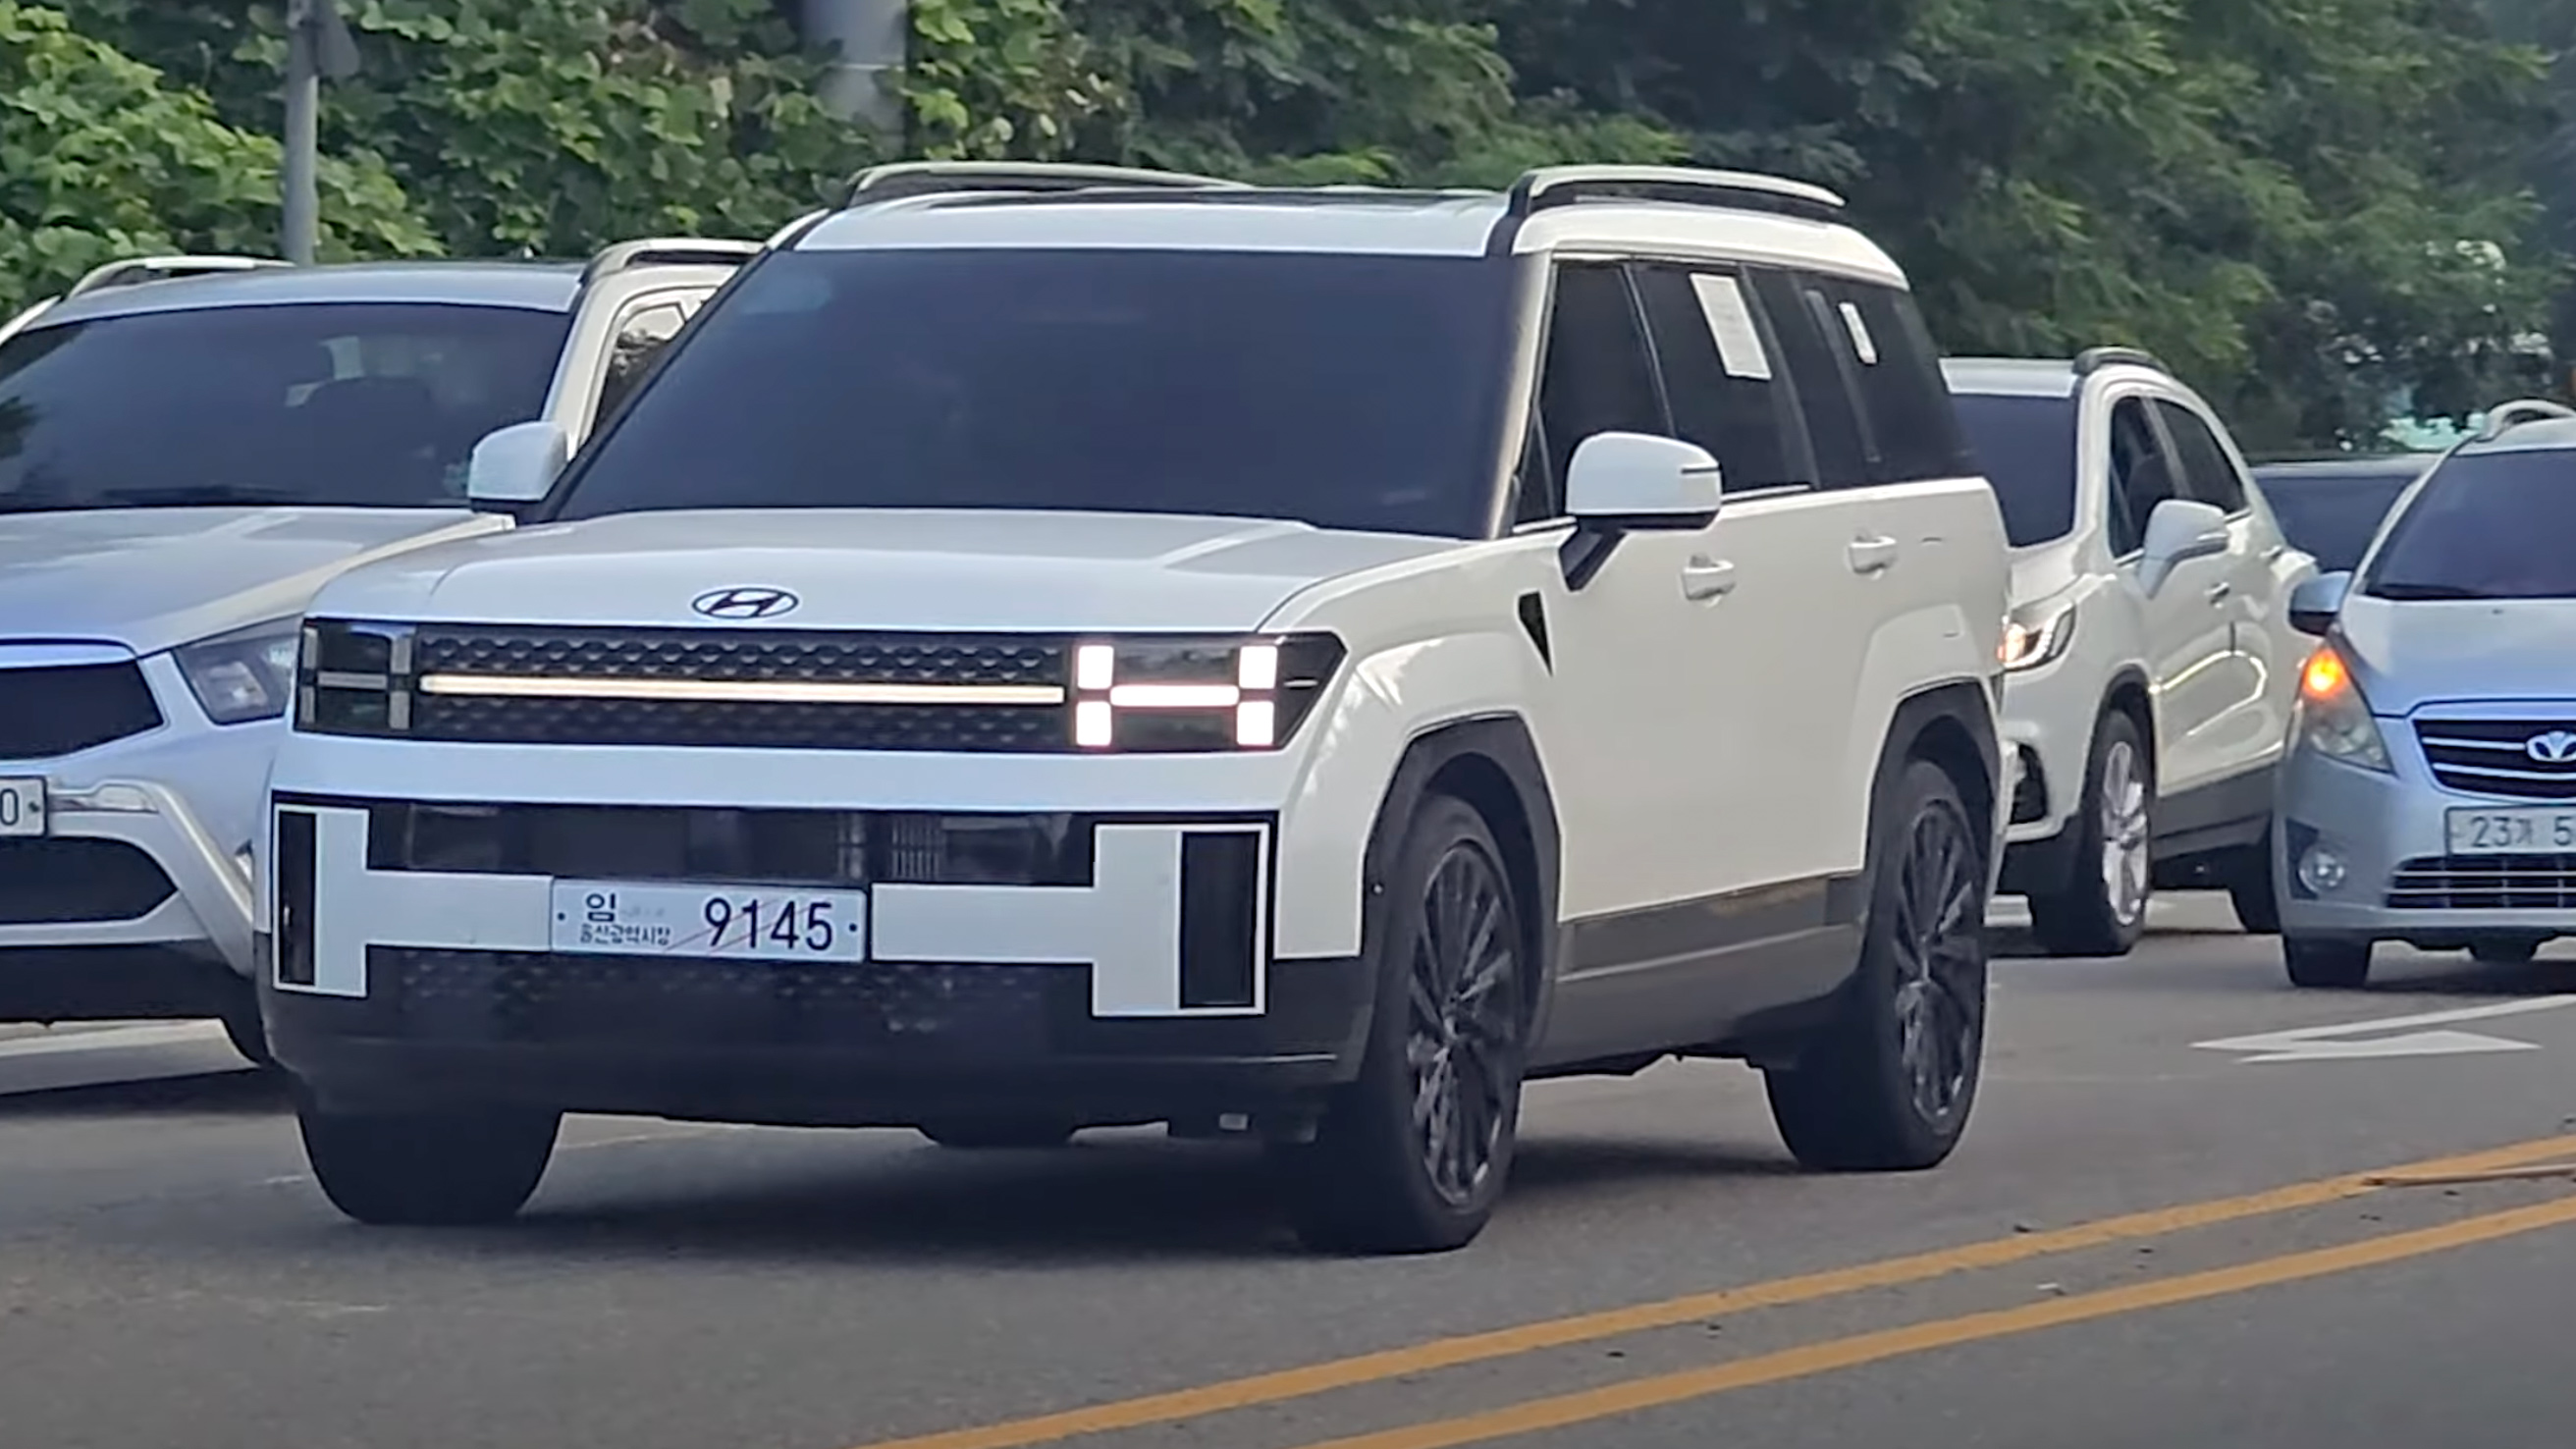 Close-up of the prominent appearance of the 2024 Hyundai Santa Fe on the street